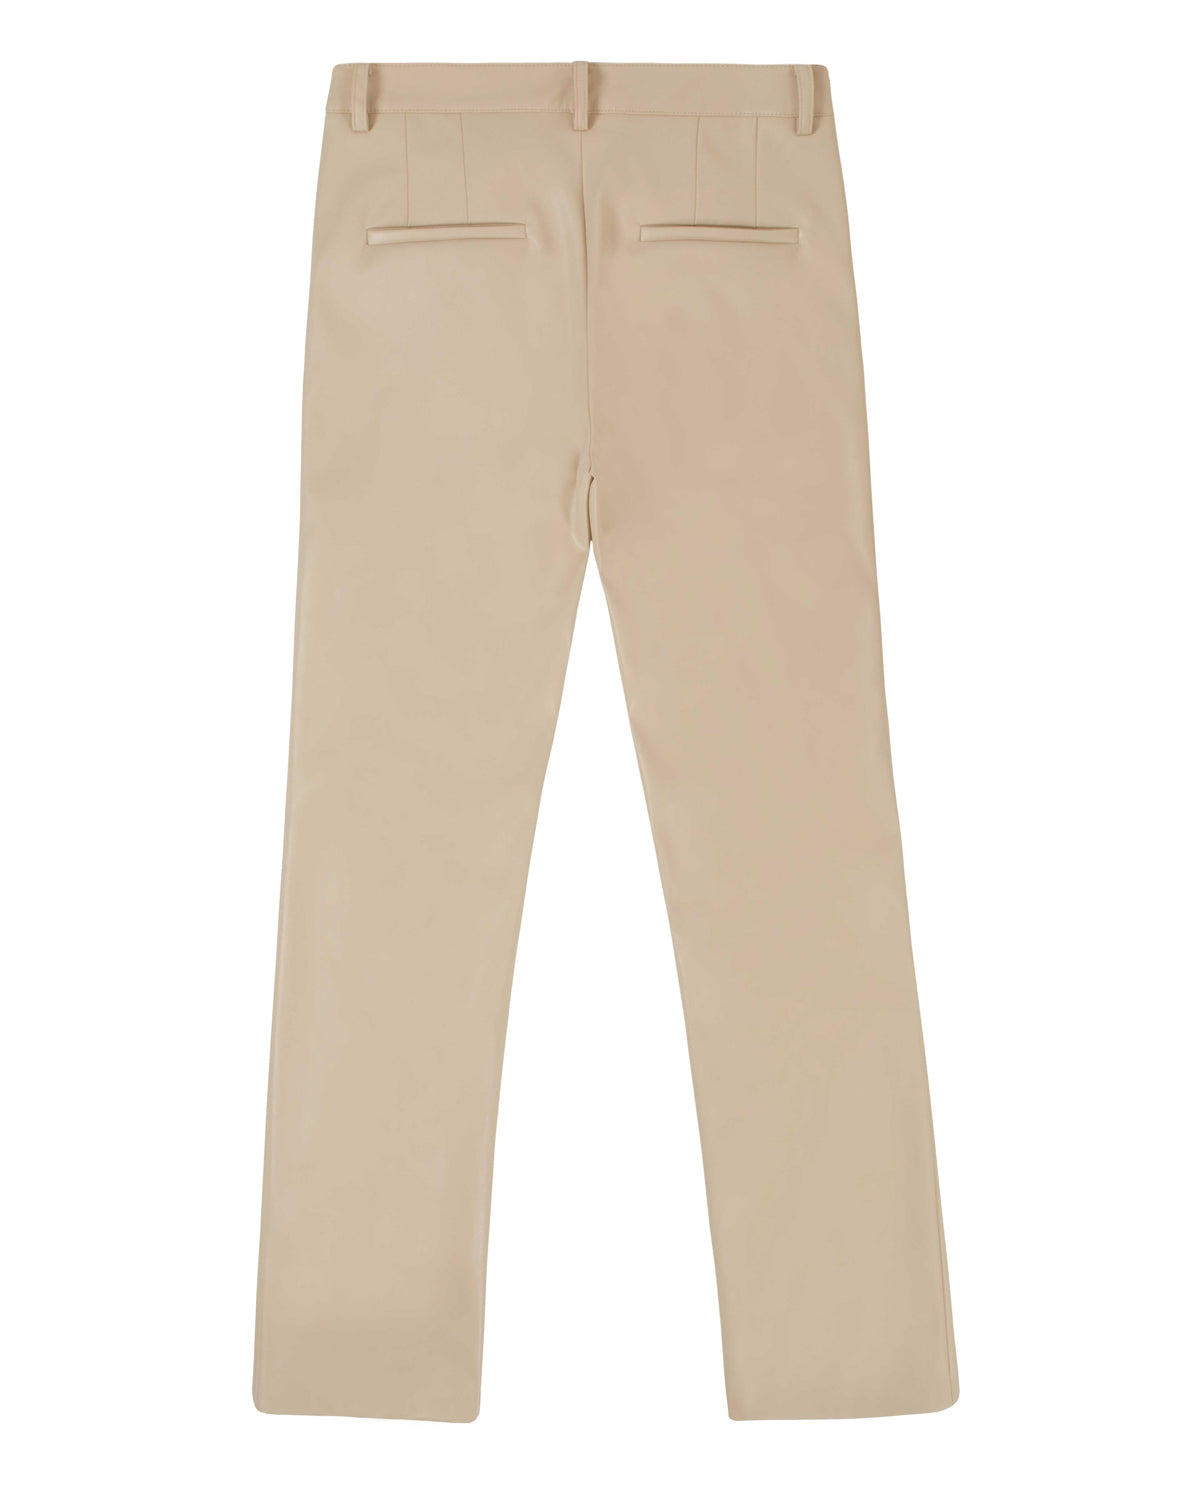 Faux-Leather Slit Trousers _ Ivory